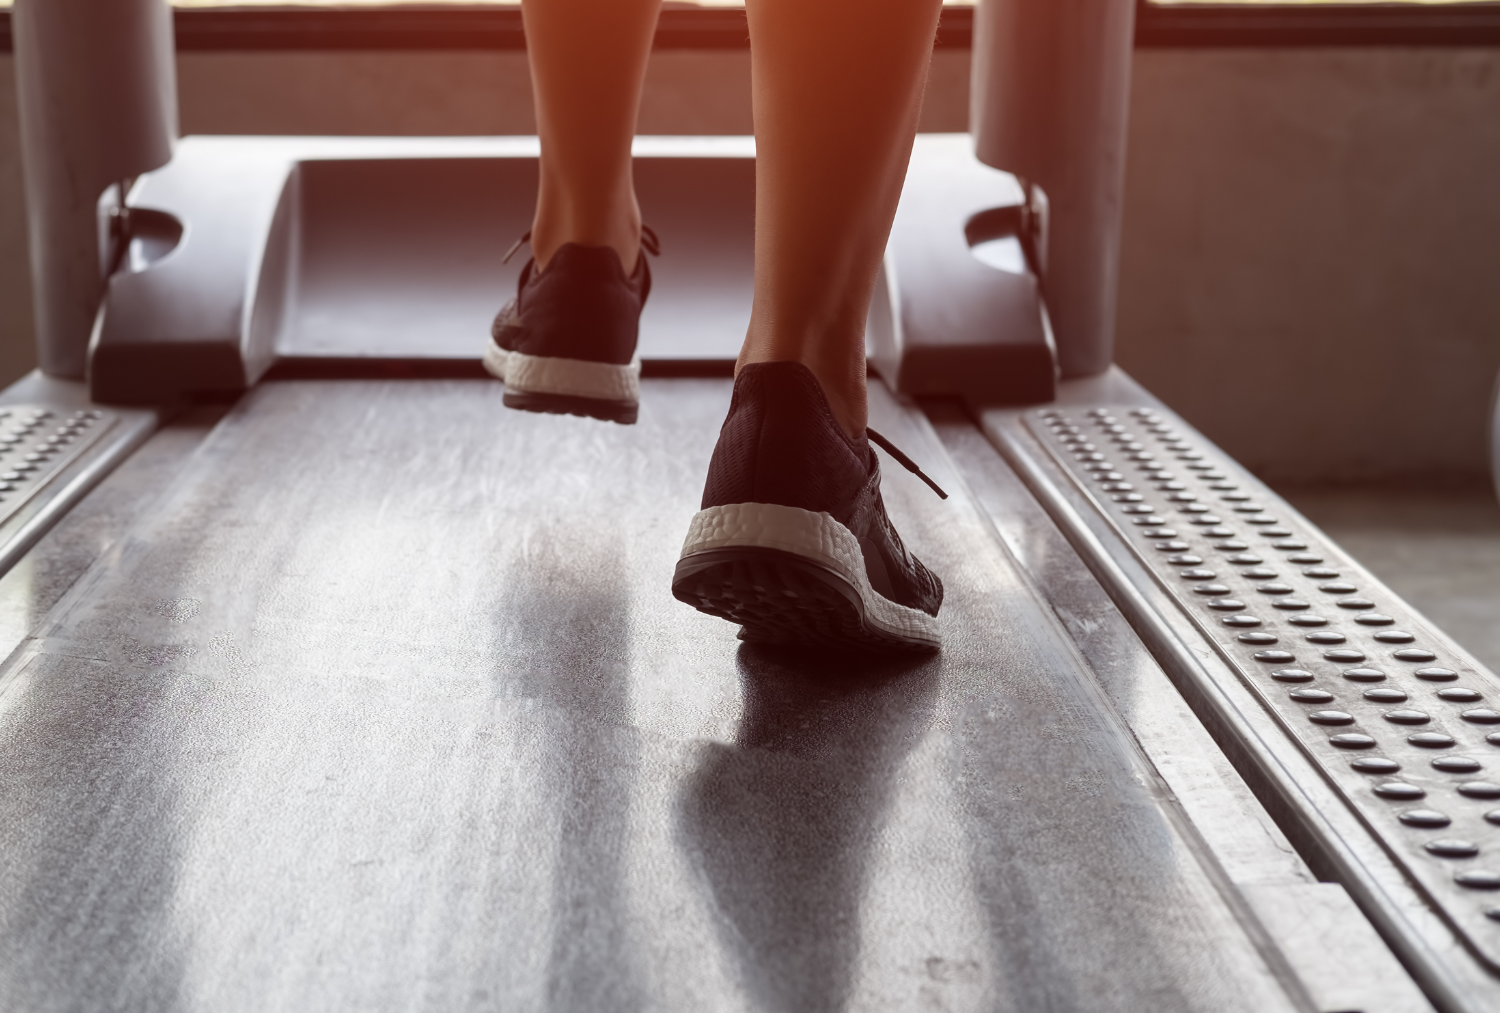 A person's feet wearing black and white running shoes on a treadmill at the Wentworth.